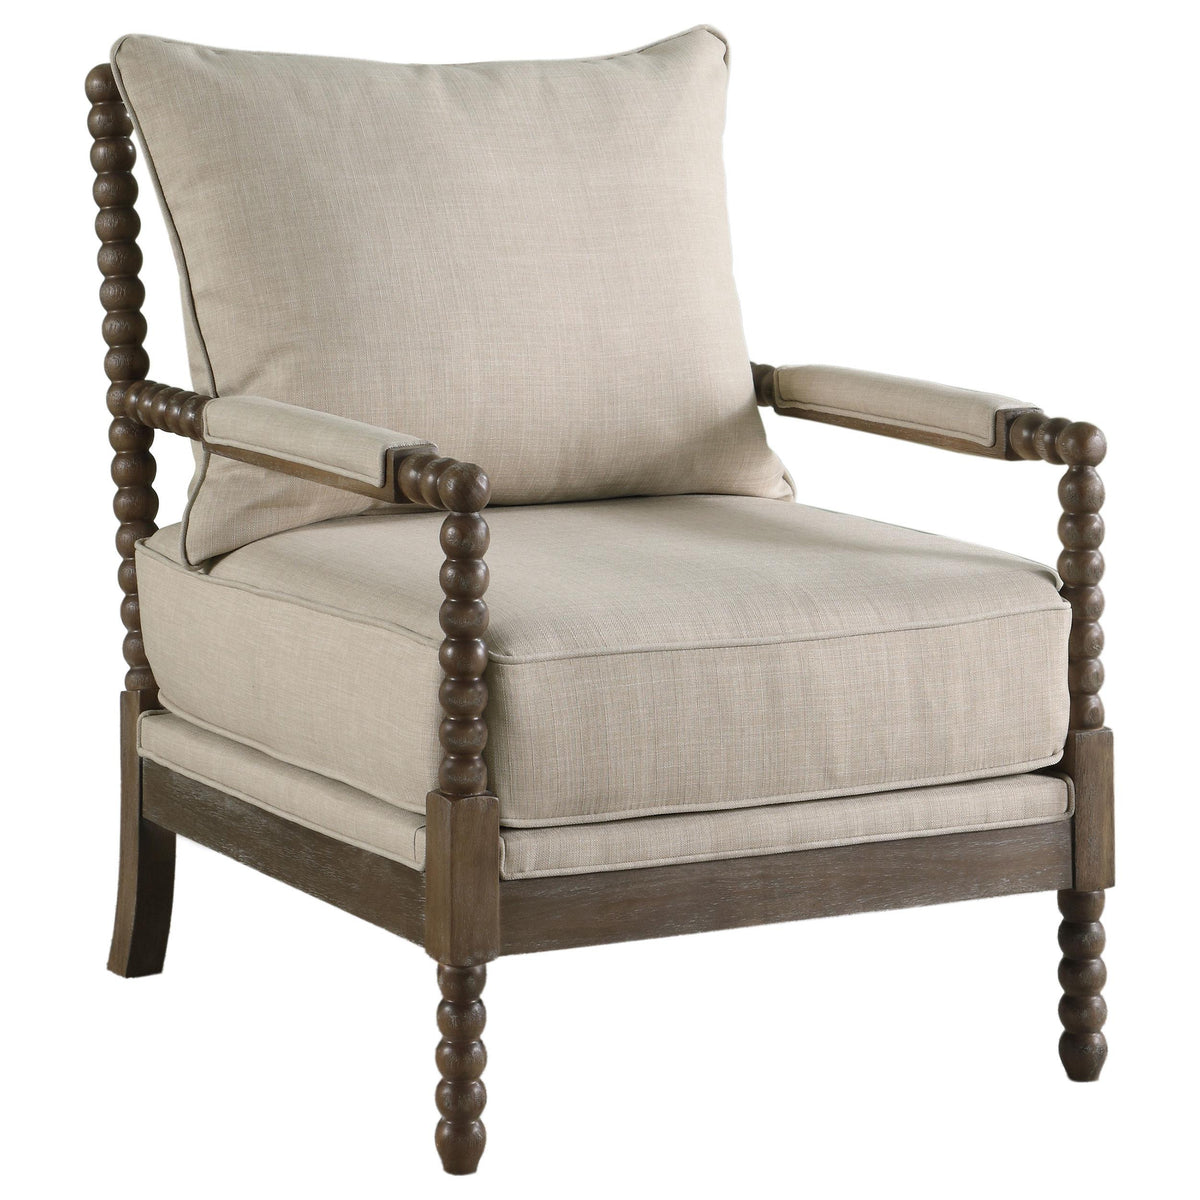 Blanchett Cushion Back Accent Chair Beige and Natural  Las Vegas Furniture Stores